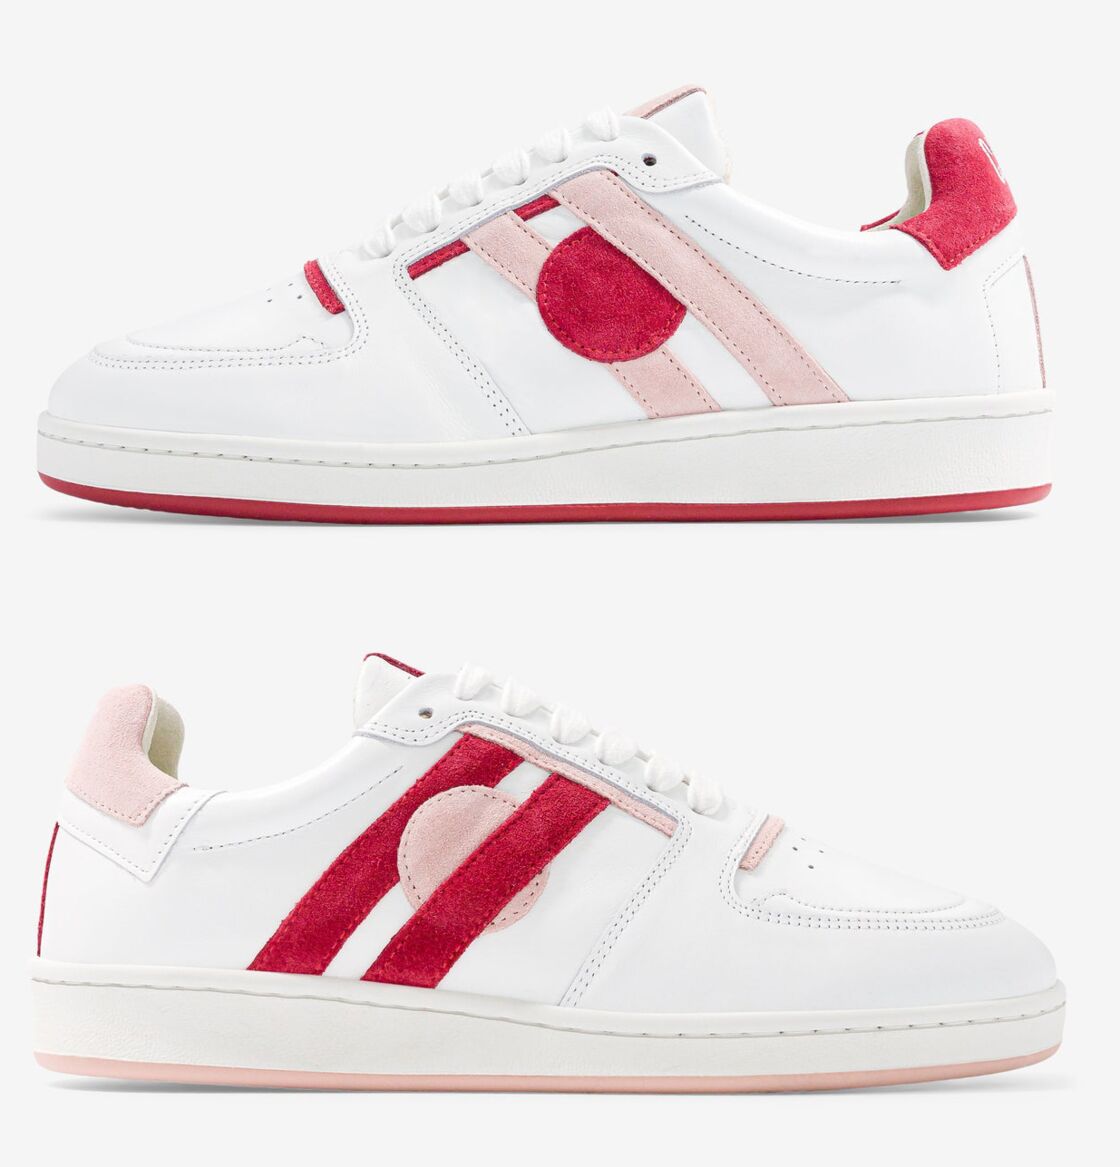 The cherry "Pink" sneakers from Caval.